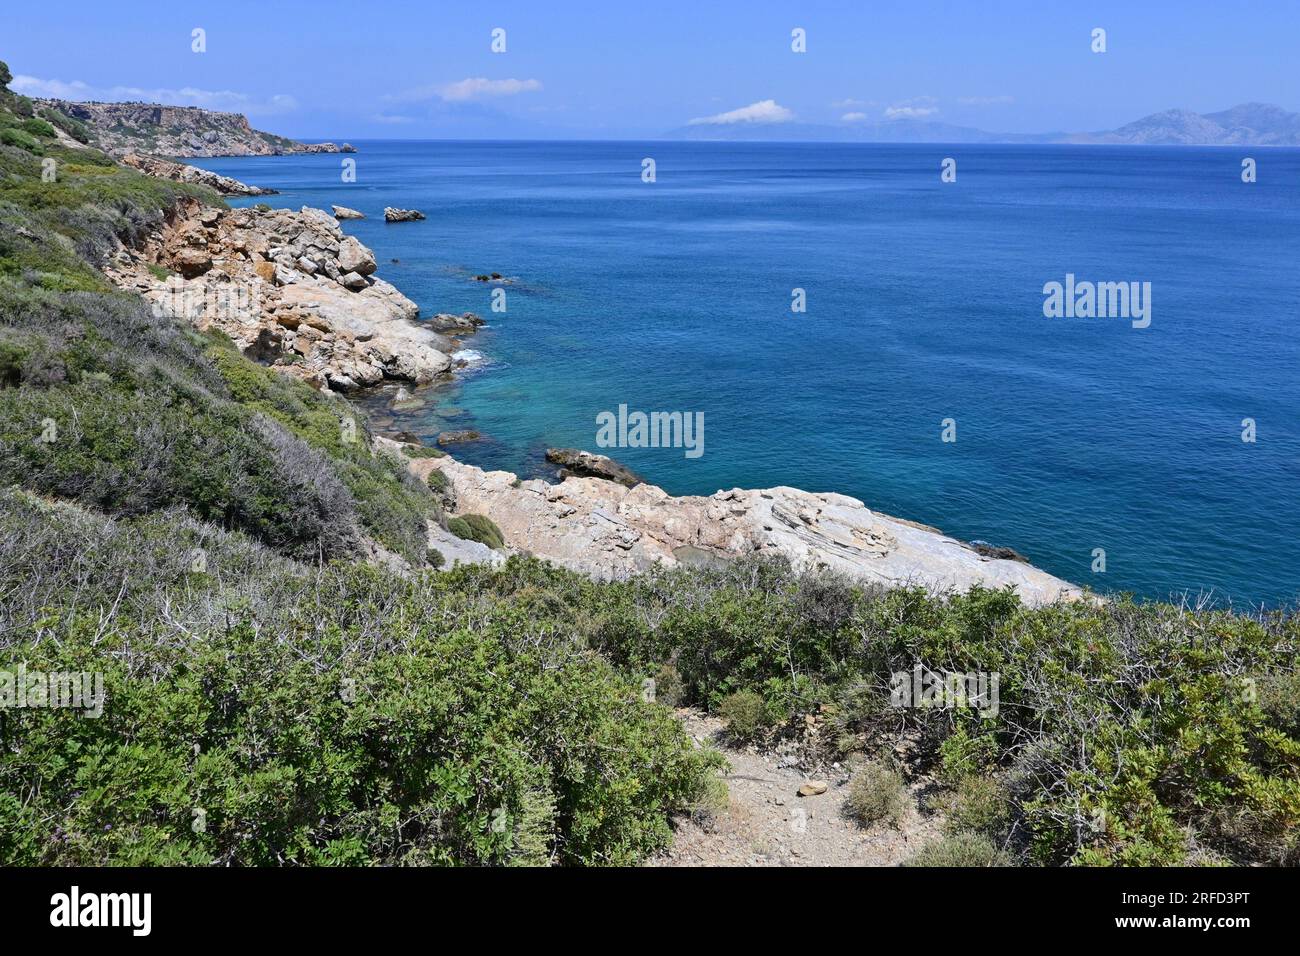 Hiking on Ikaria Island near ancient thermal springs, Therma Stock Photo